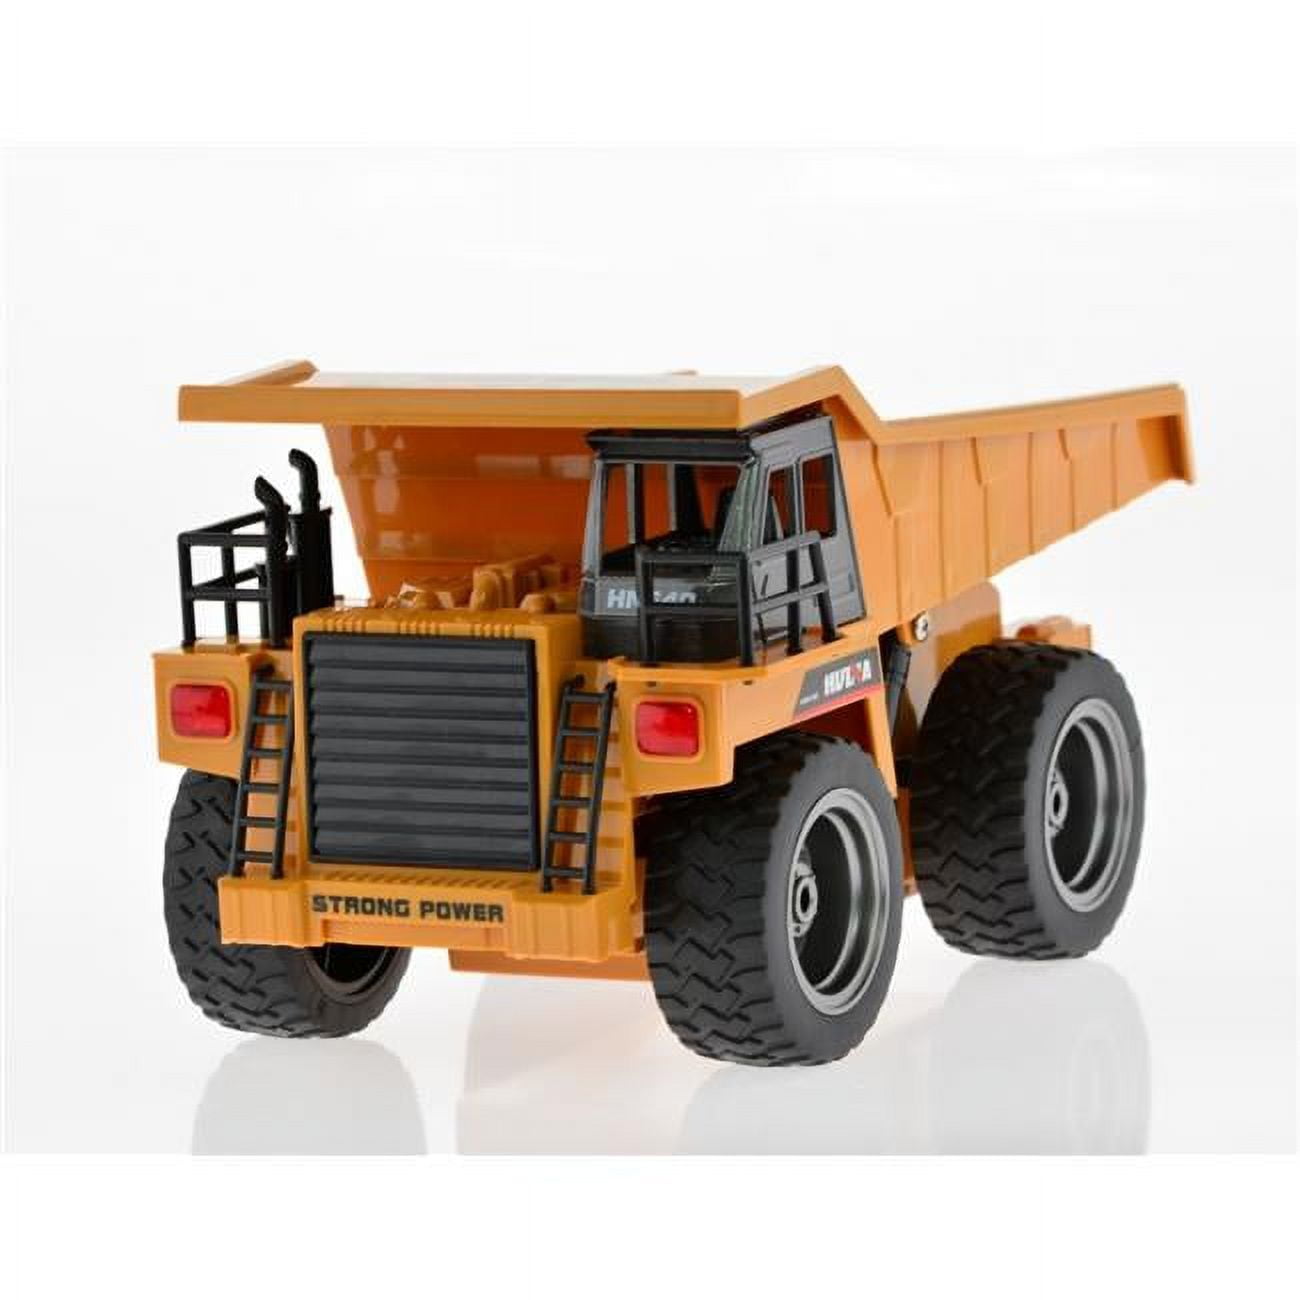 Picture of CIS-Associates 1540 1:18 scale 2.4 GHz 6 channel mining truck with rechargeable batteries